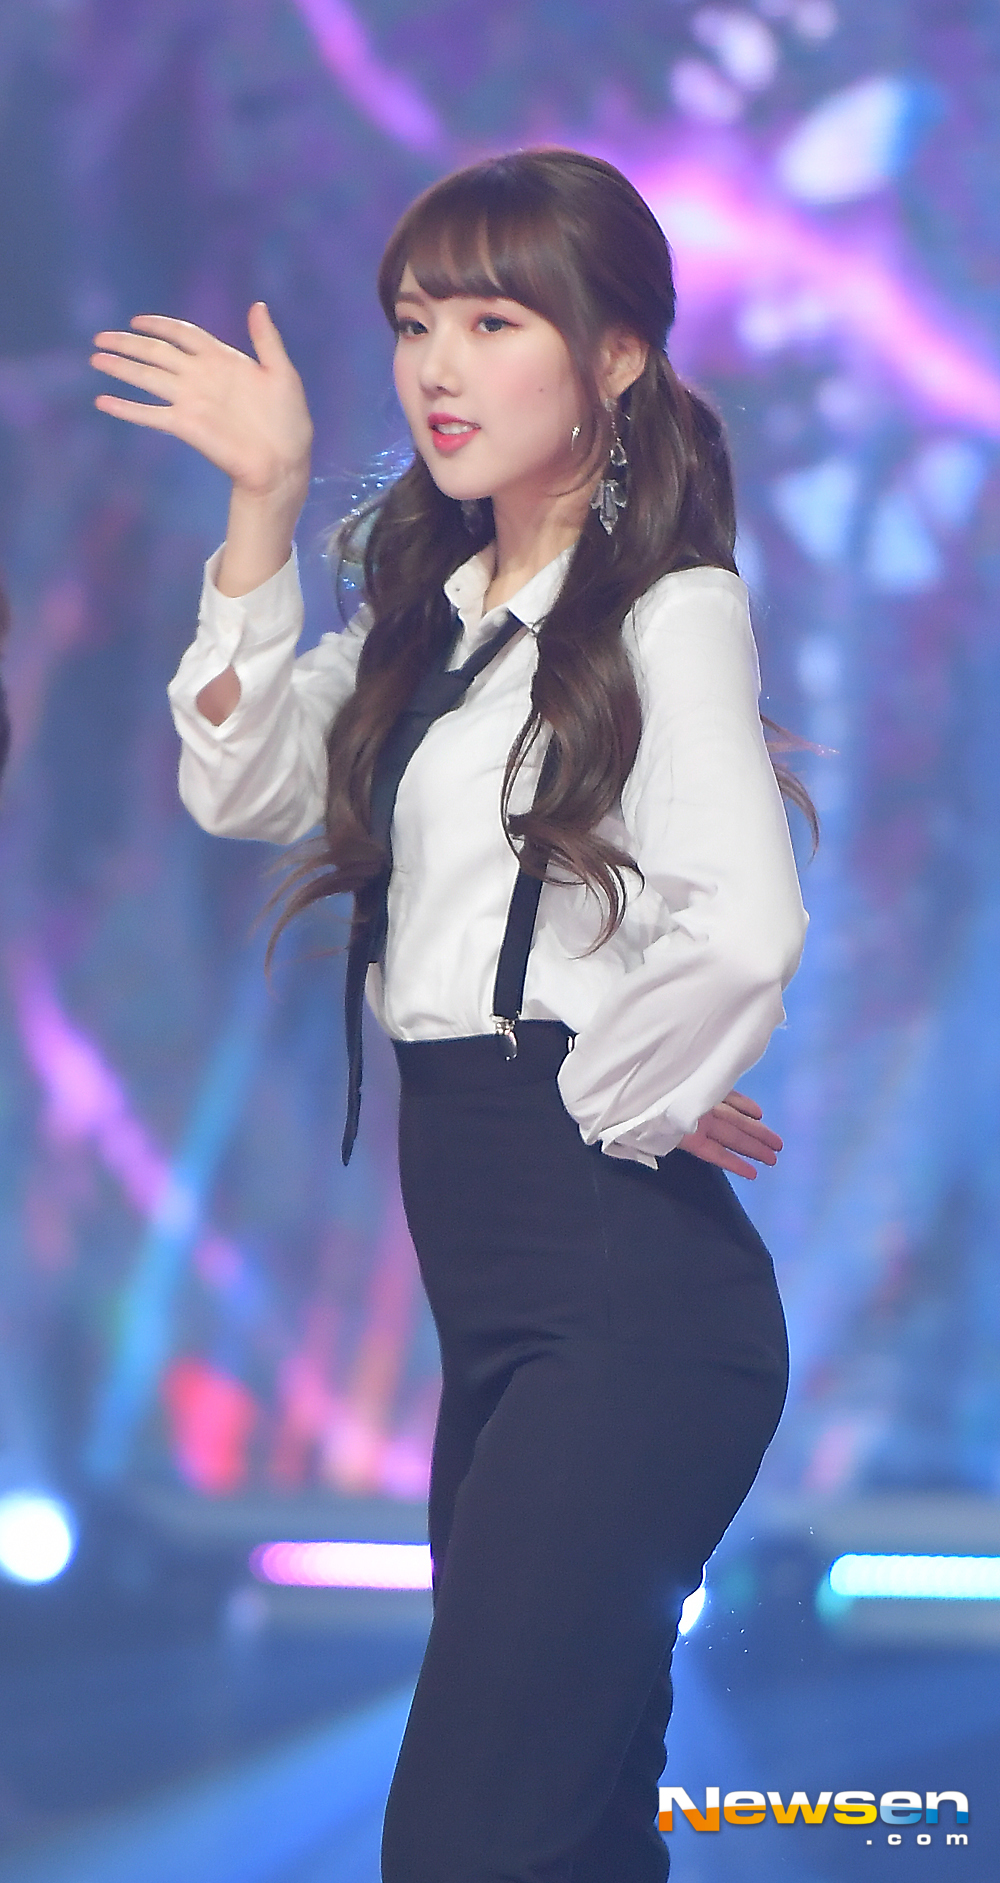 MBC Music Live Show Champion was held at MBC Dream Center in Ilsan, Gyeonggi Province on the afternoon of January 30th.On that day, his GFriend showed off a spectacular stage.The show champion performance featured Seventeen, Lee Min Hyuk, GFriend, CLC, space girl, Roh Tae Hyun, Nam Tae Hyun, Impact, Knack, Berryberry, Cherry Blett, One Earth, Neon Punch, Kim Soo Chan, Lucas and Pink Fantasy.expressiveness